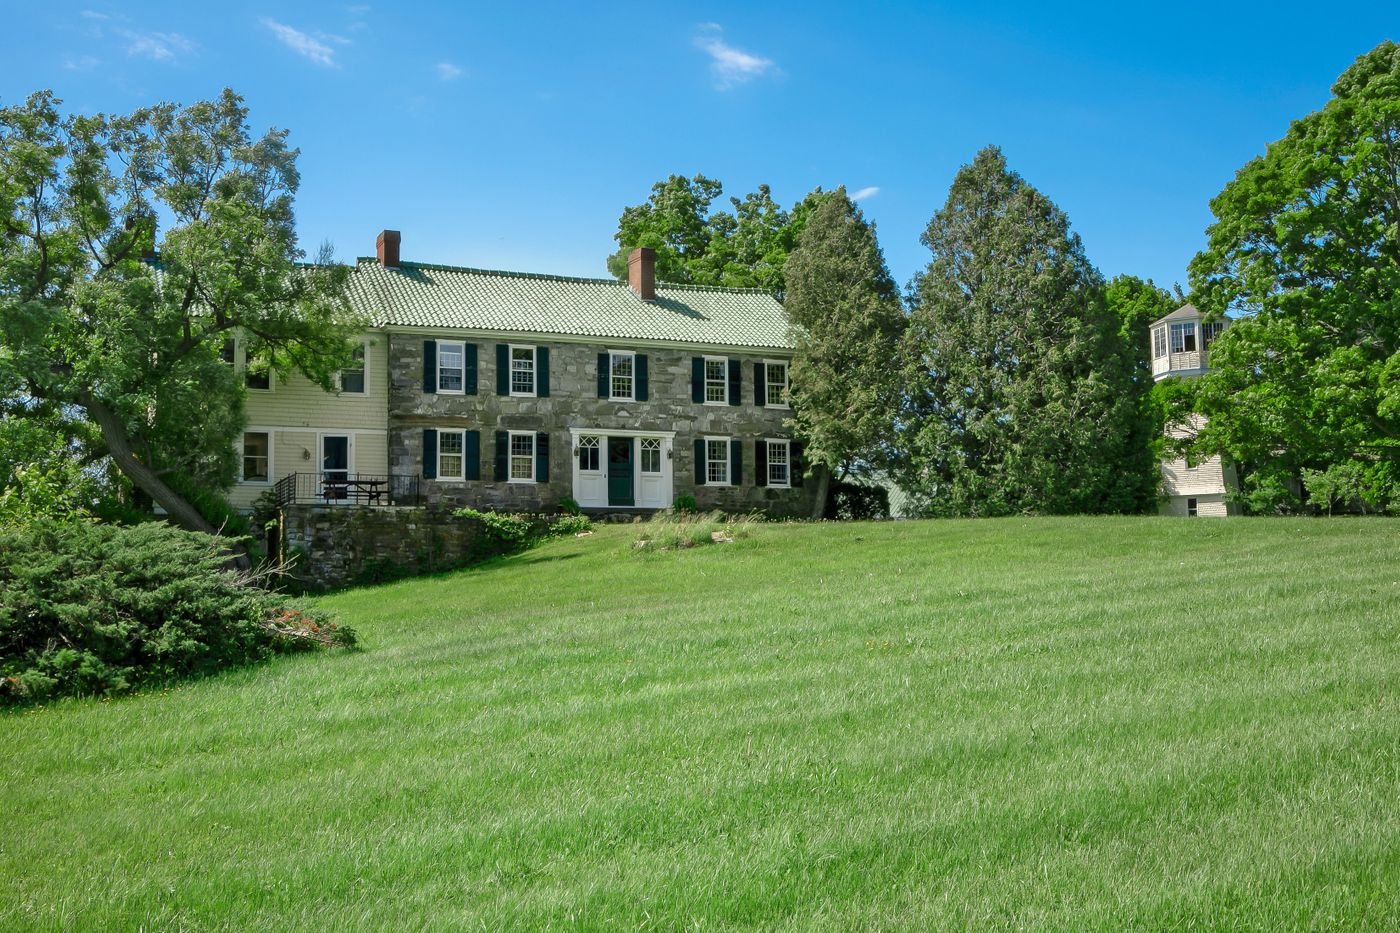 Francis York This New England Estate Comes with a Restored 18th Century Farmhouse and Entertainment Barns 4.jpeg